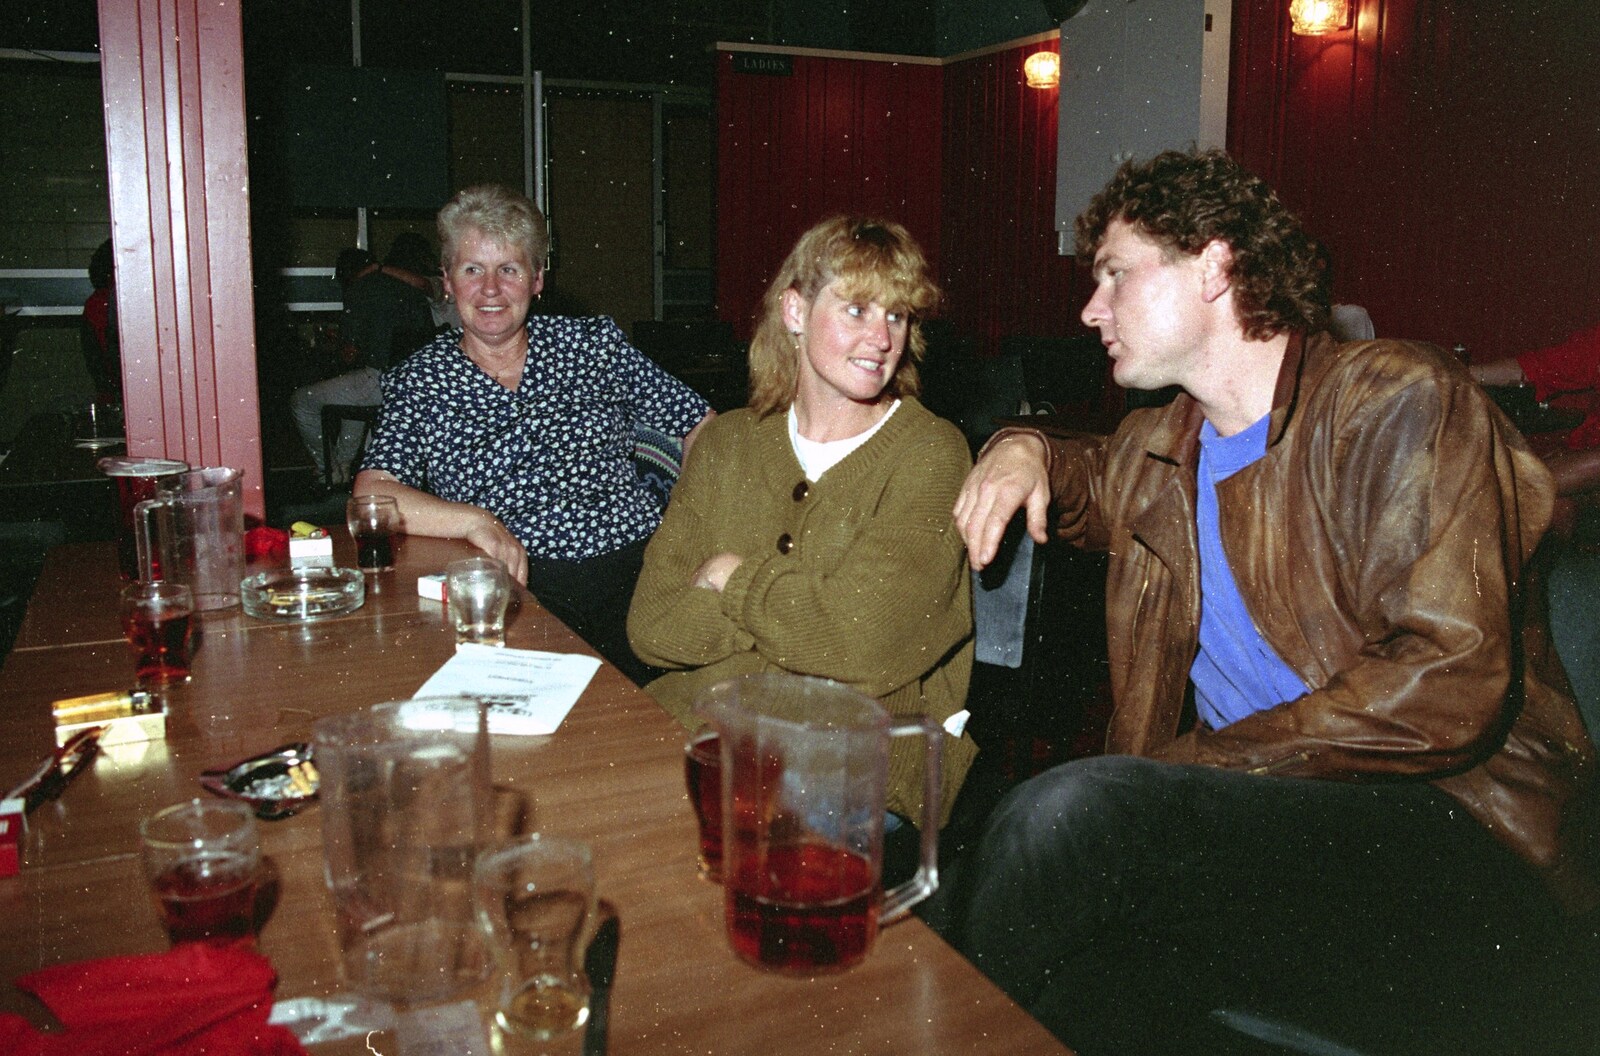 Beers in the Whitianga Social Club from Ferry Landing, Whitianga, New Zealand - 23rd November 1992